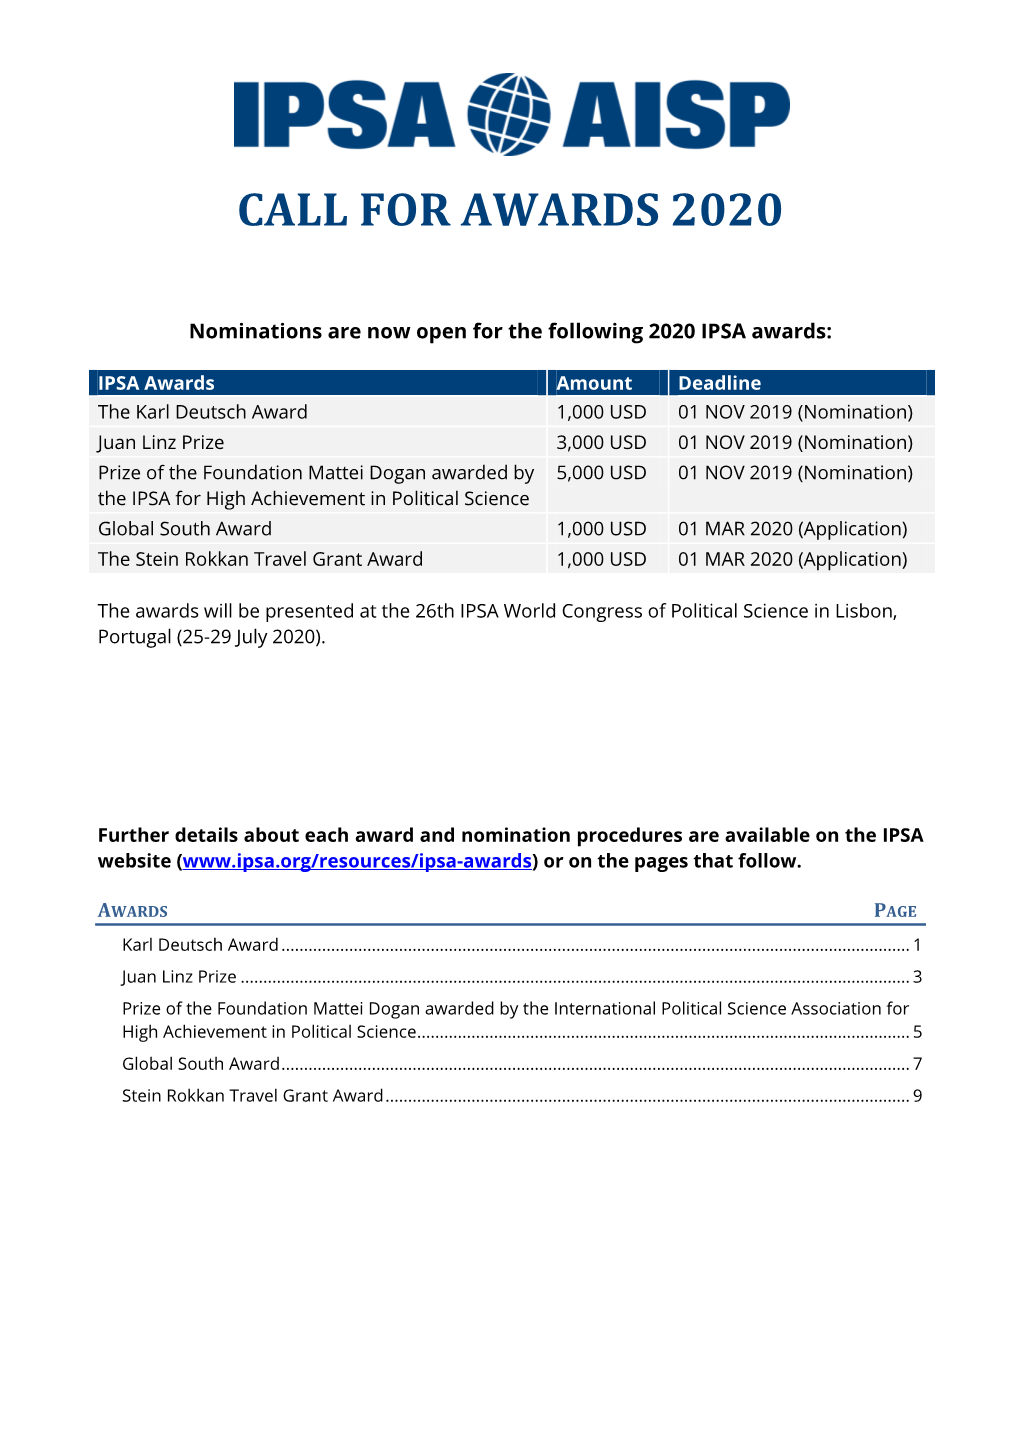 Call for Awards 2020